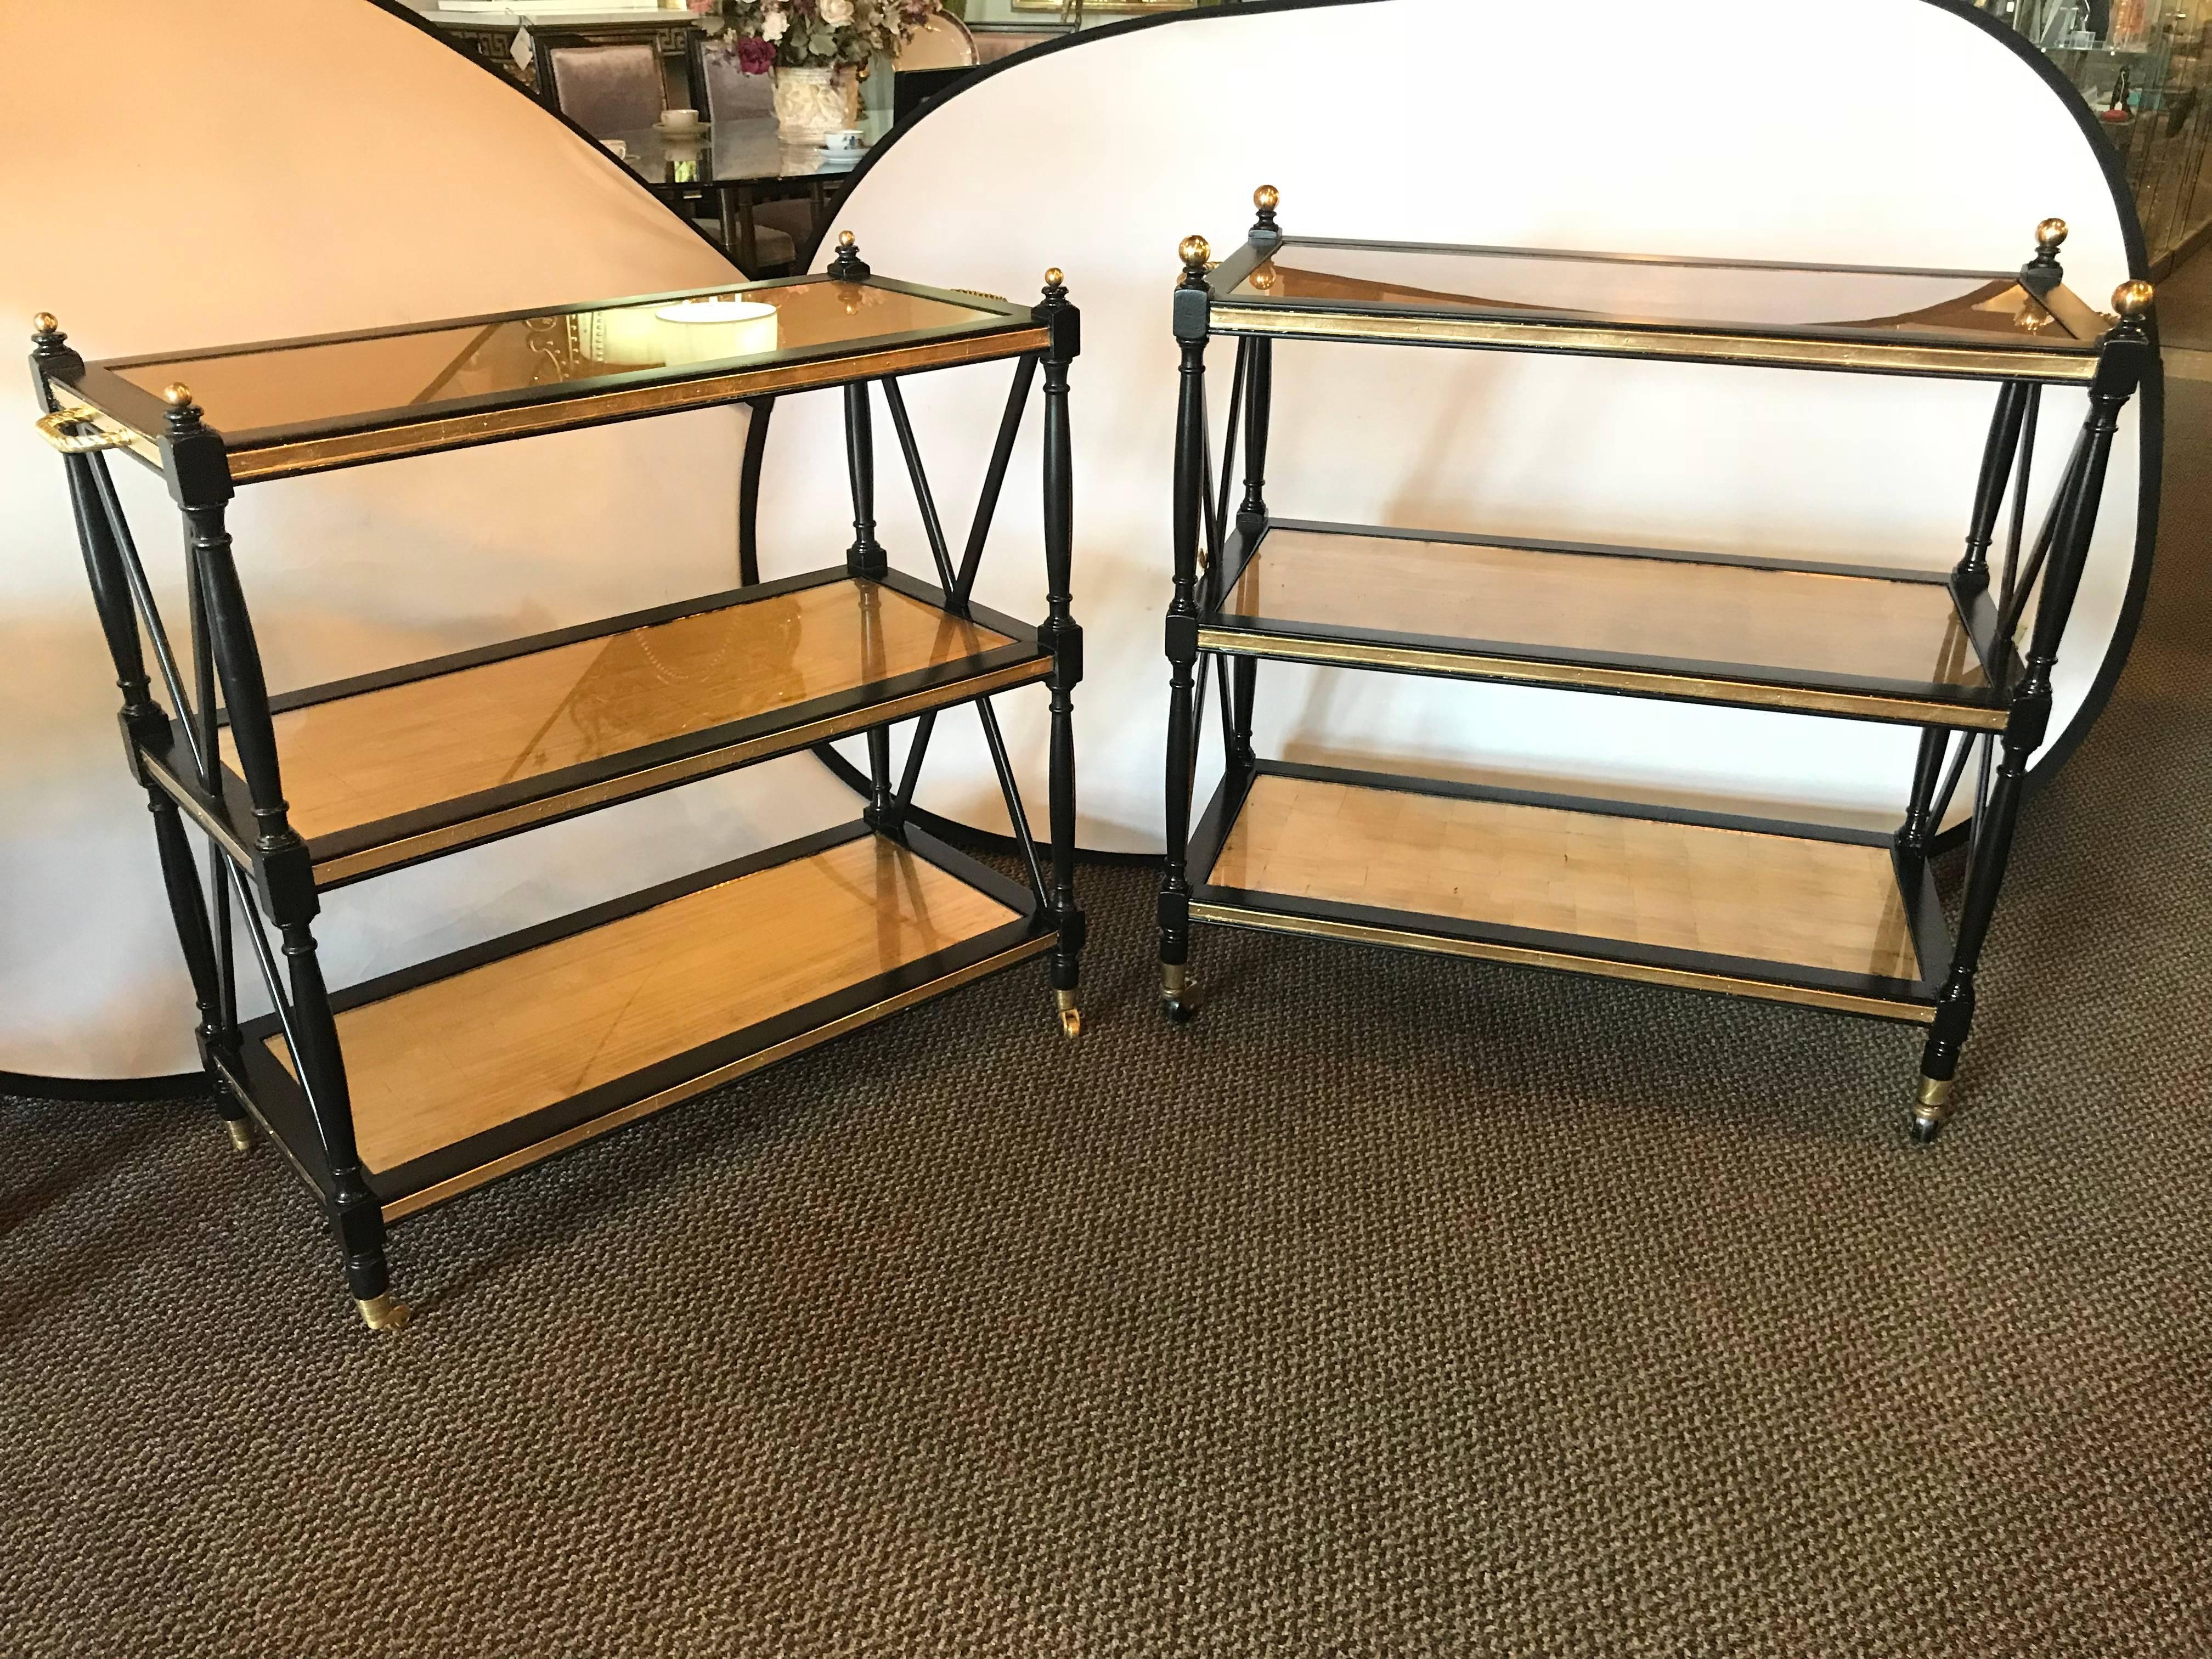 A Compatible  Pair of Fine Hollywood Regency Ebony and Gilt Glass Bronze Mounted Three-Tier Tea Serving Carts. Attributed to Maison Jansen. Each on casters having ribbed bronze framed aprons supporting the gilt glass shelves. One pair with slightly